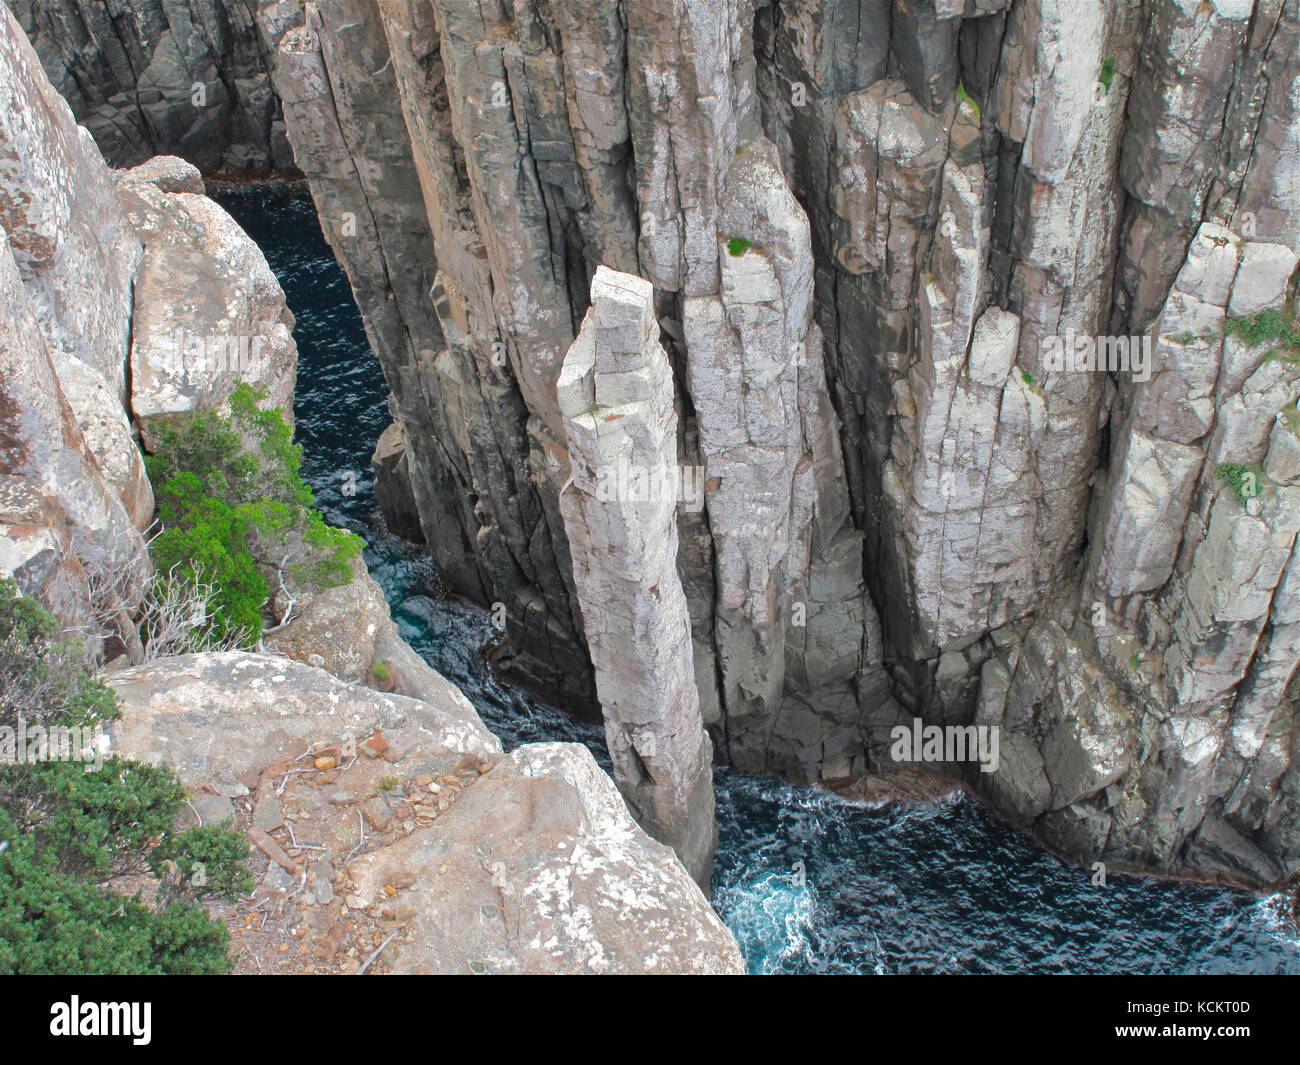 The Totem Pole, about 65 m tall, from above. A columnar dolerite pillar with frequent massive swells crashing around its base. A rockclimbing site, on Stock Photo